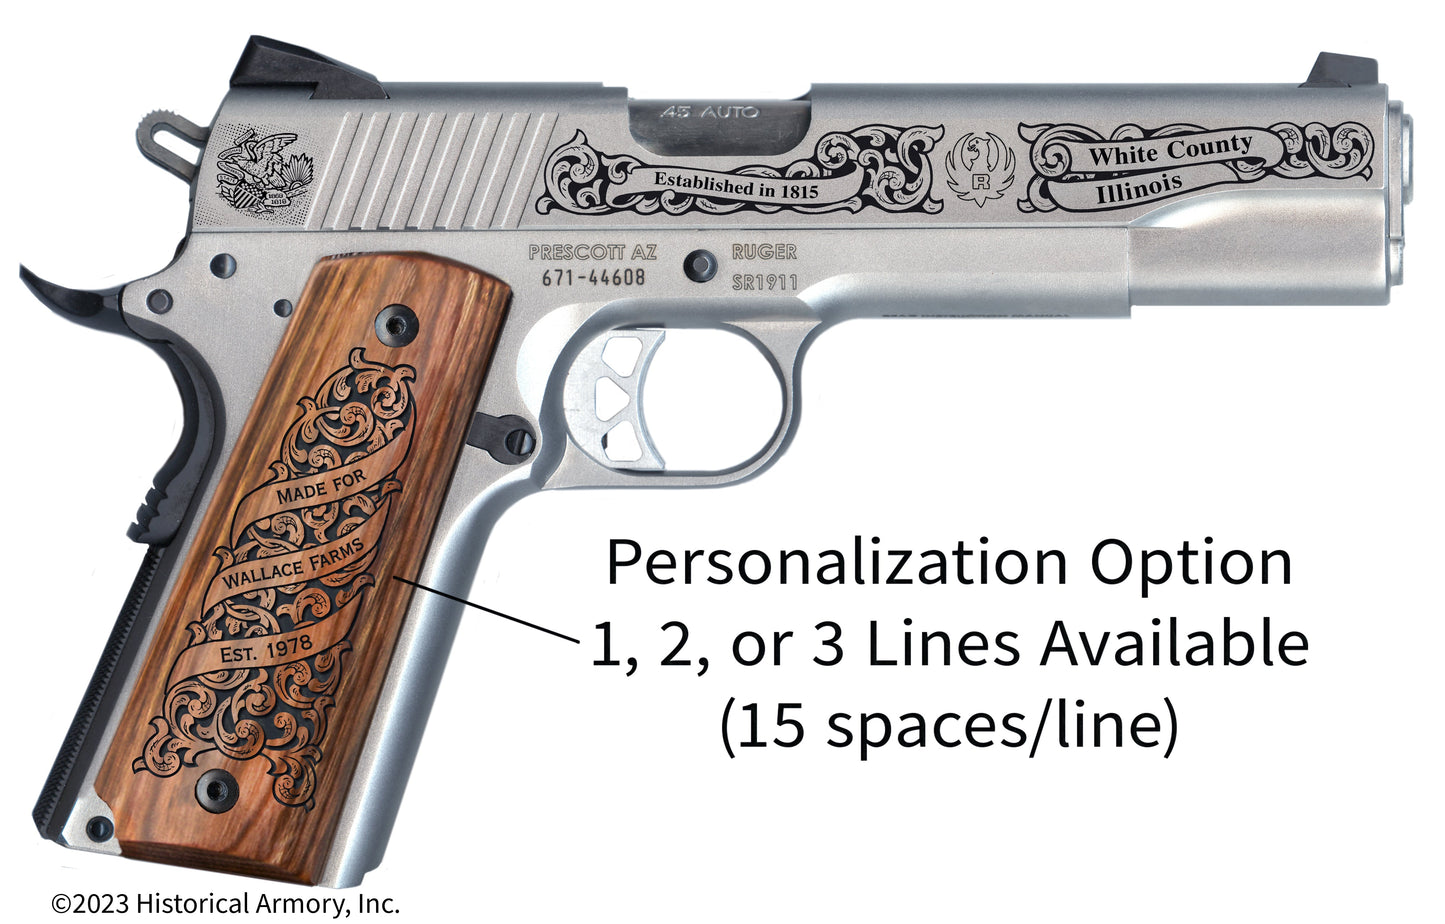 White County Illinois Personalized Engraved .45 Auto Ruger 1911